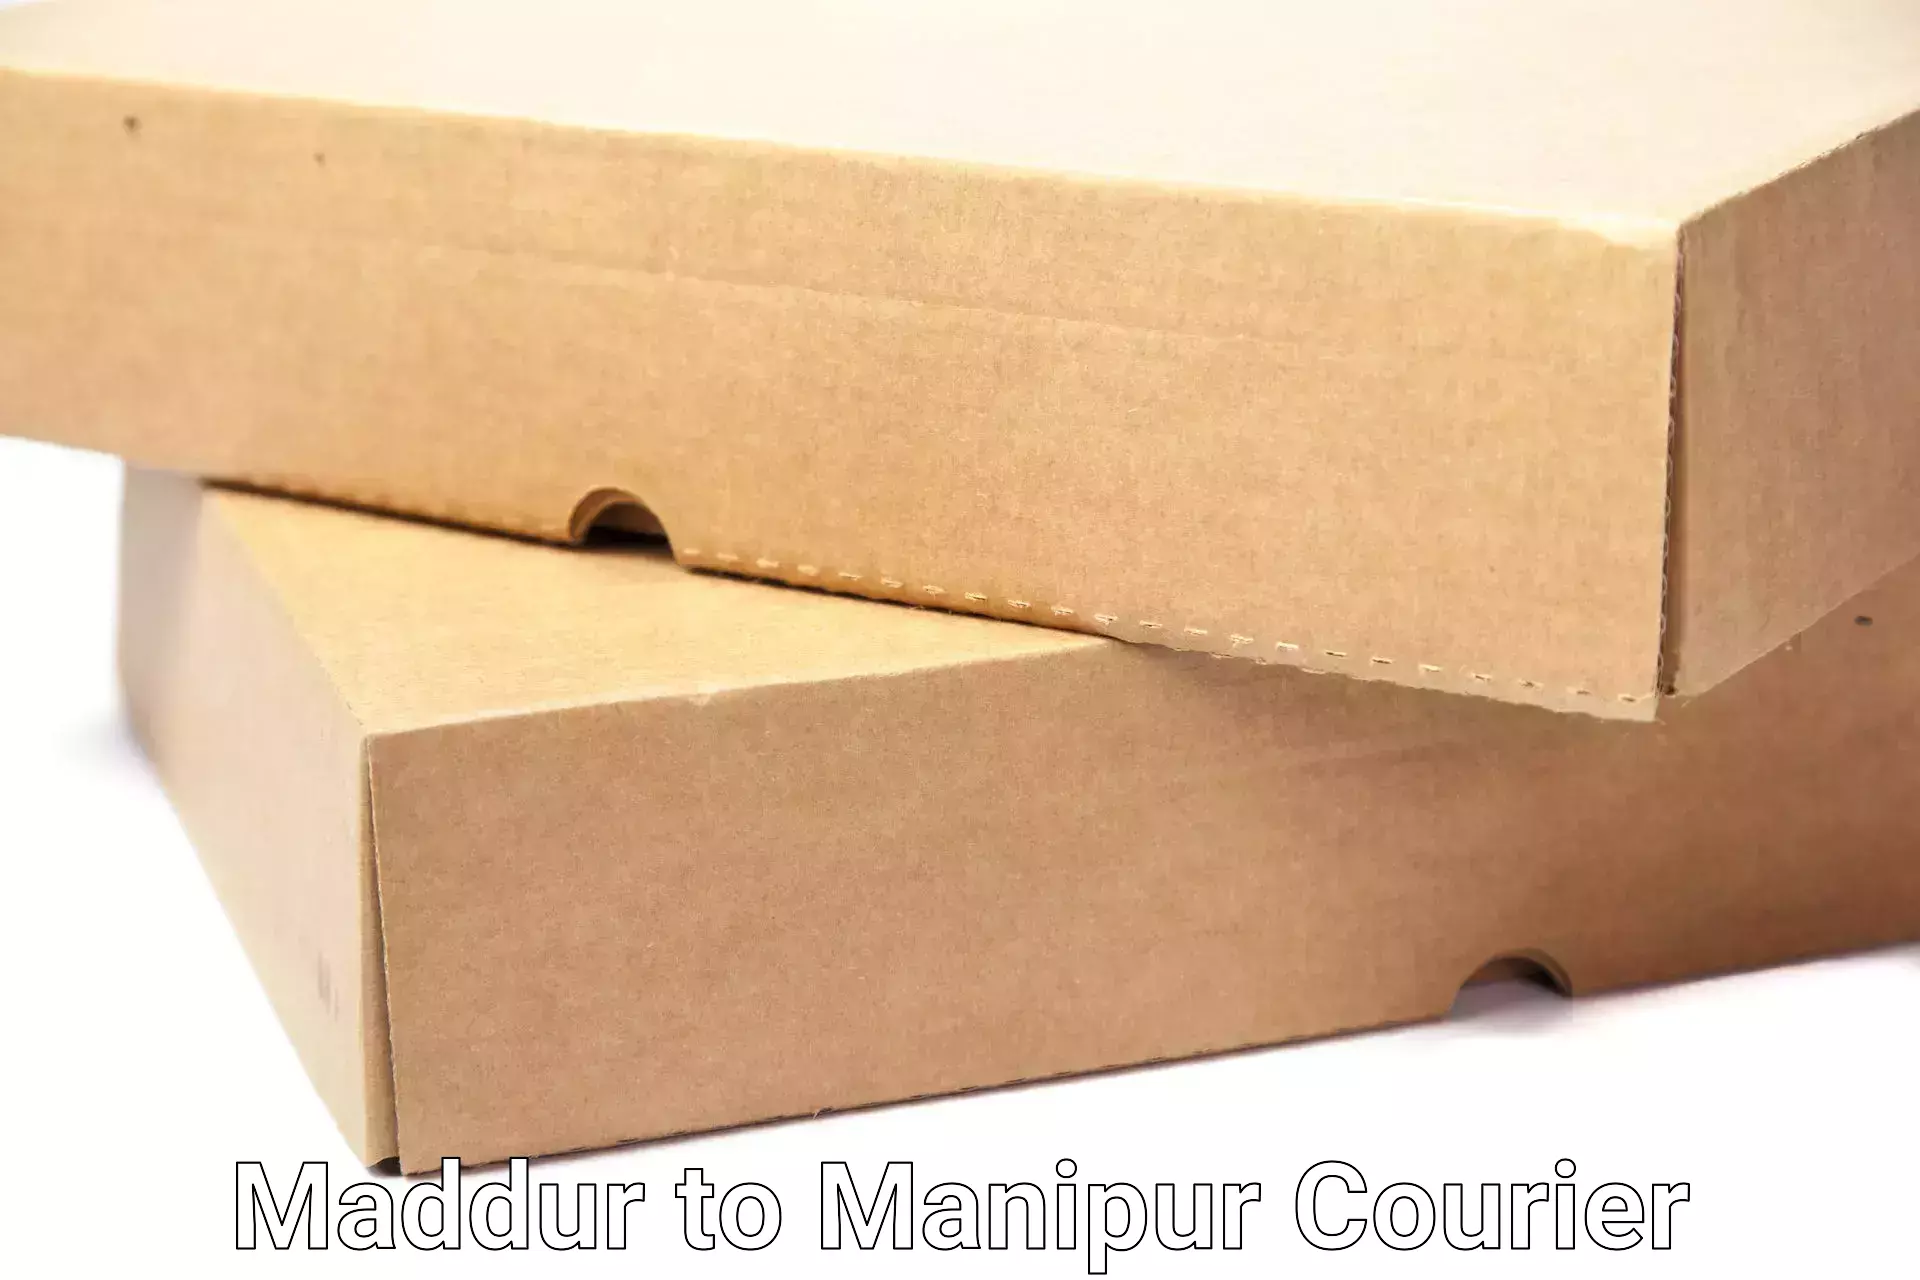 Quality relocation assistance Maddur to Manipur